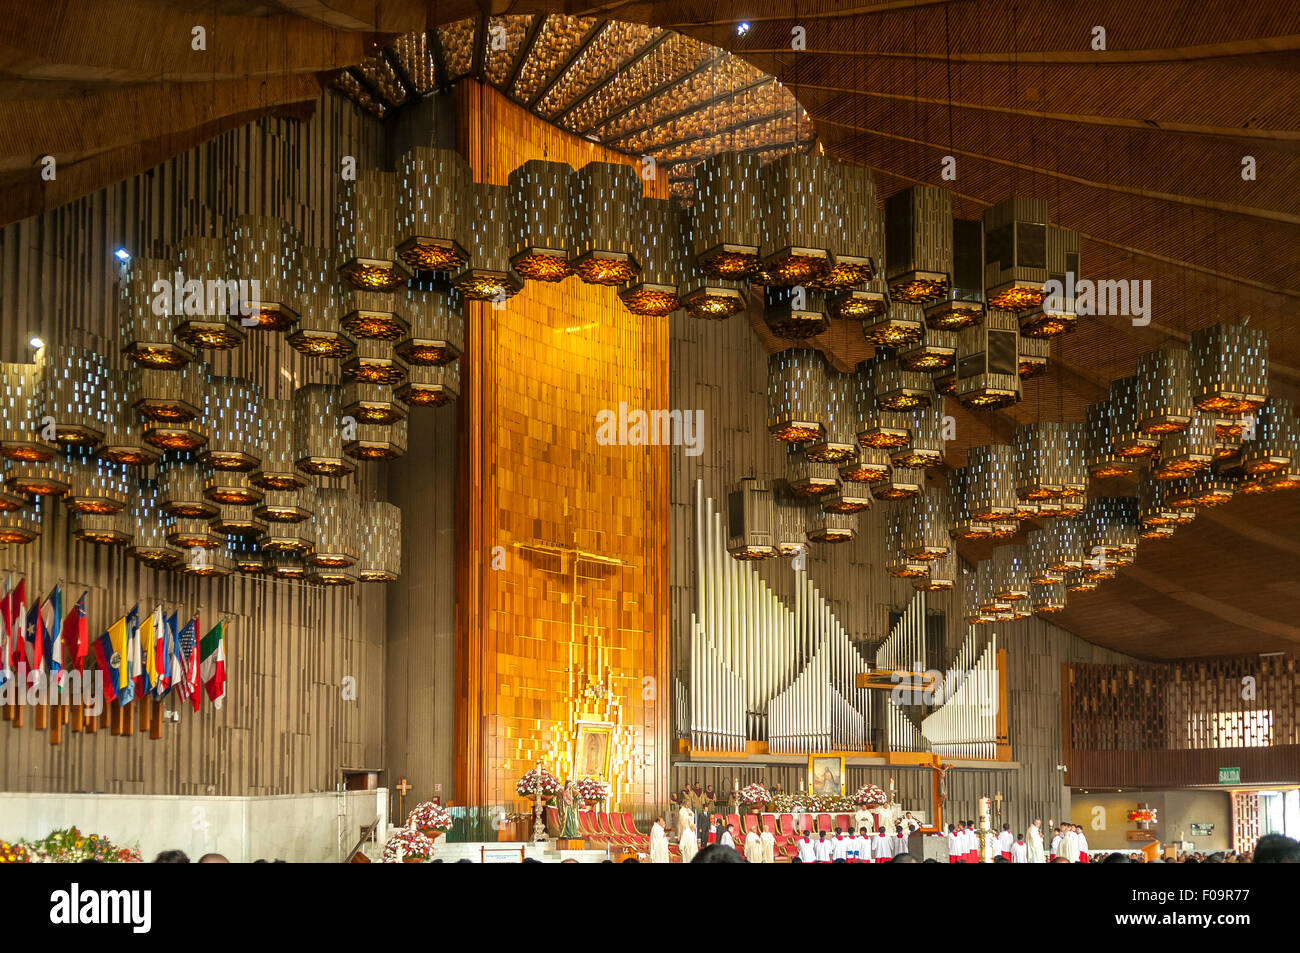 Inside New Basilica of Our Lady of Guadalupe, Mexico City, Mexico Stock Photo